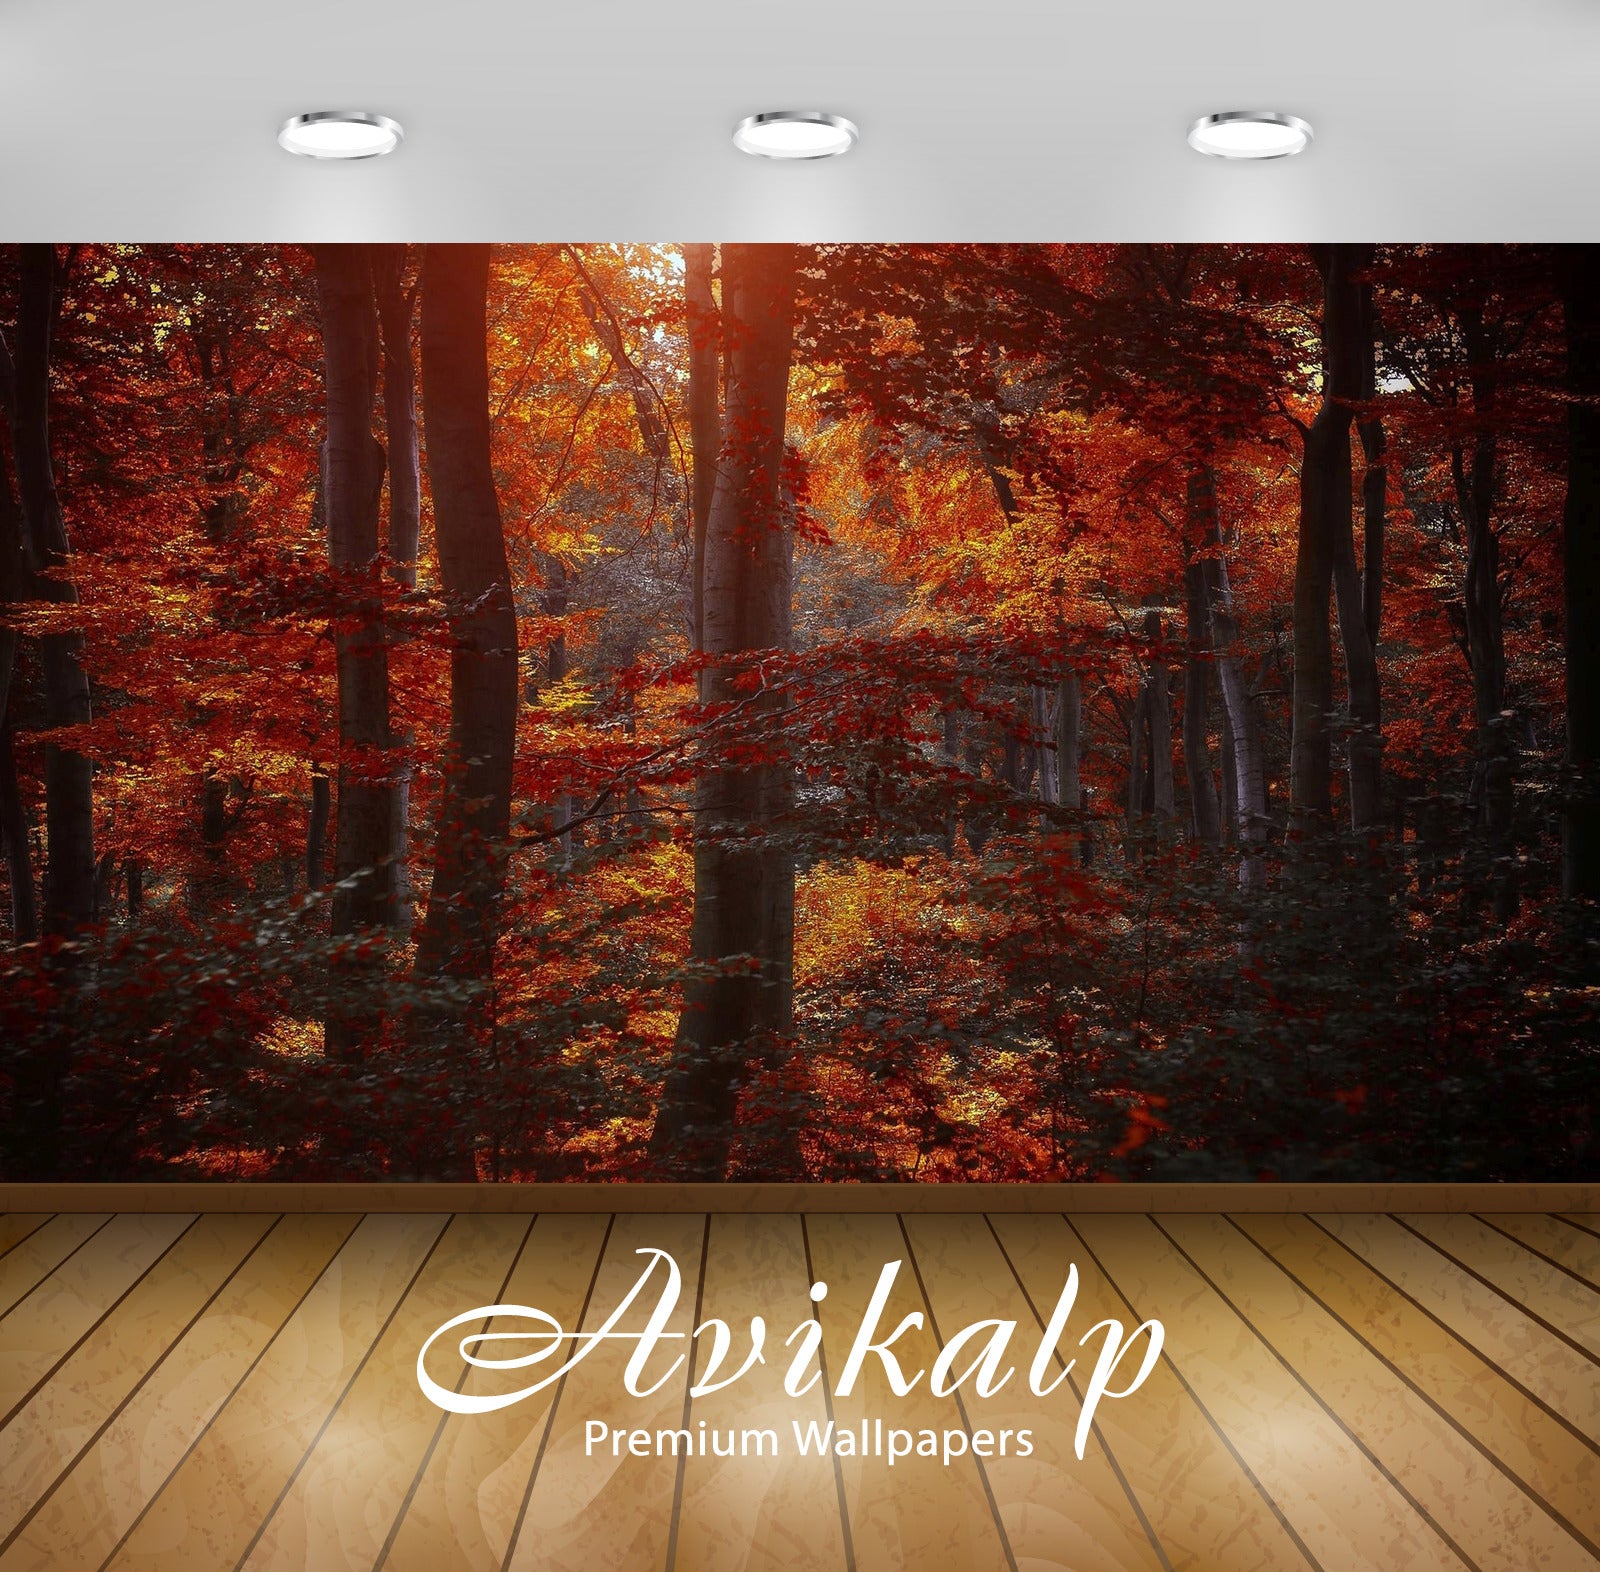 Avikalp Exclusive Awi6171 Shades Of Autumn In The Forest Nature Full HD Wallpapers for Living room,